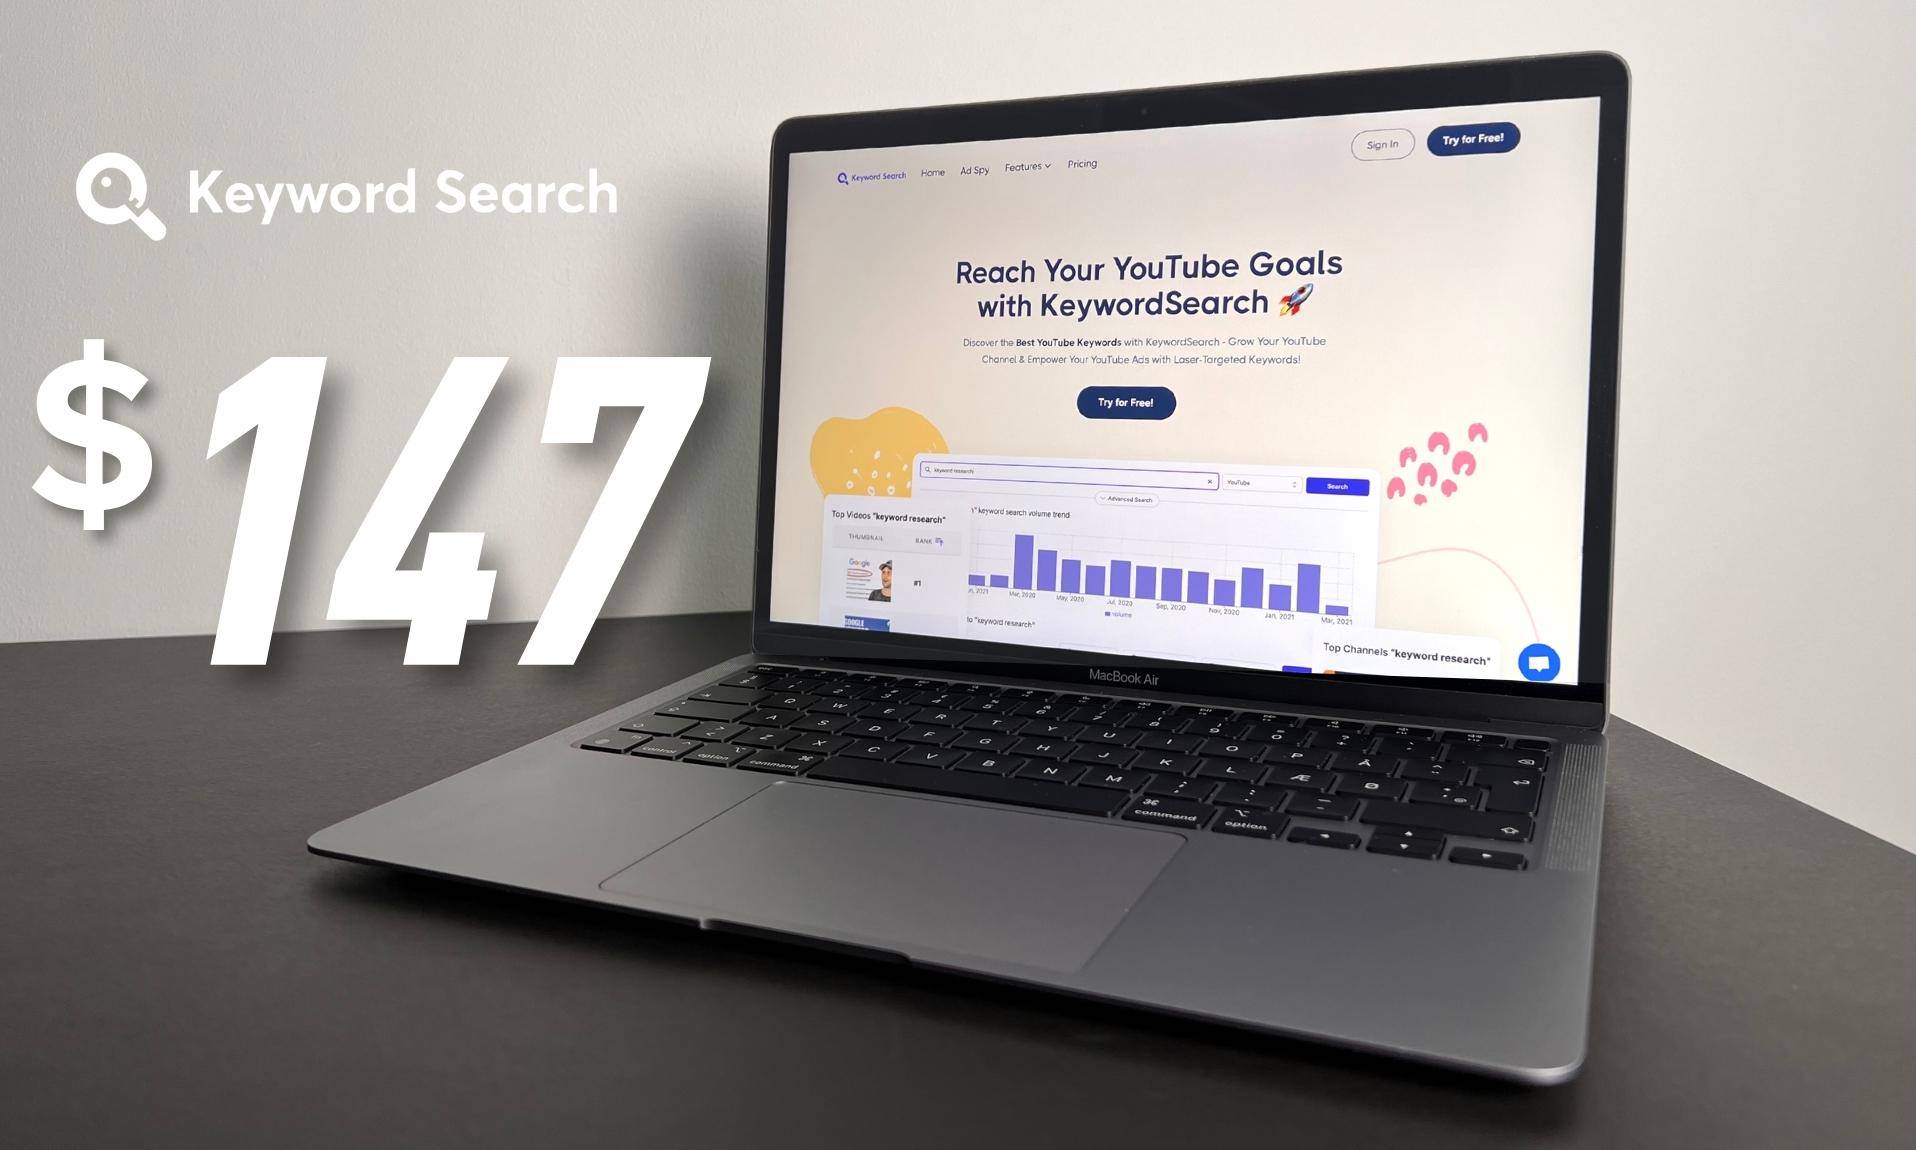 Keyword Search Review - Find YouTube Video Gaps